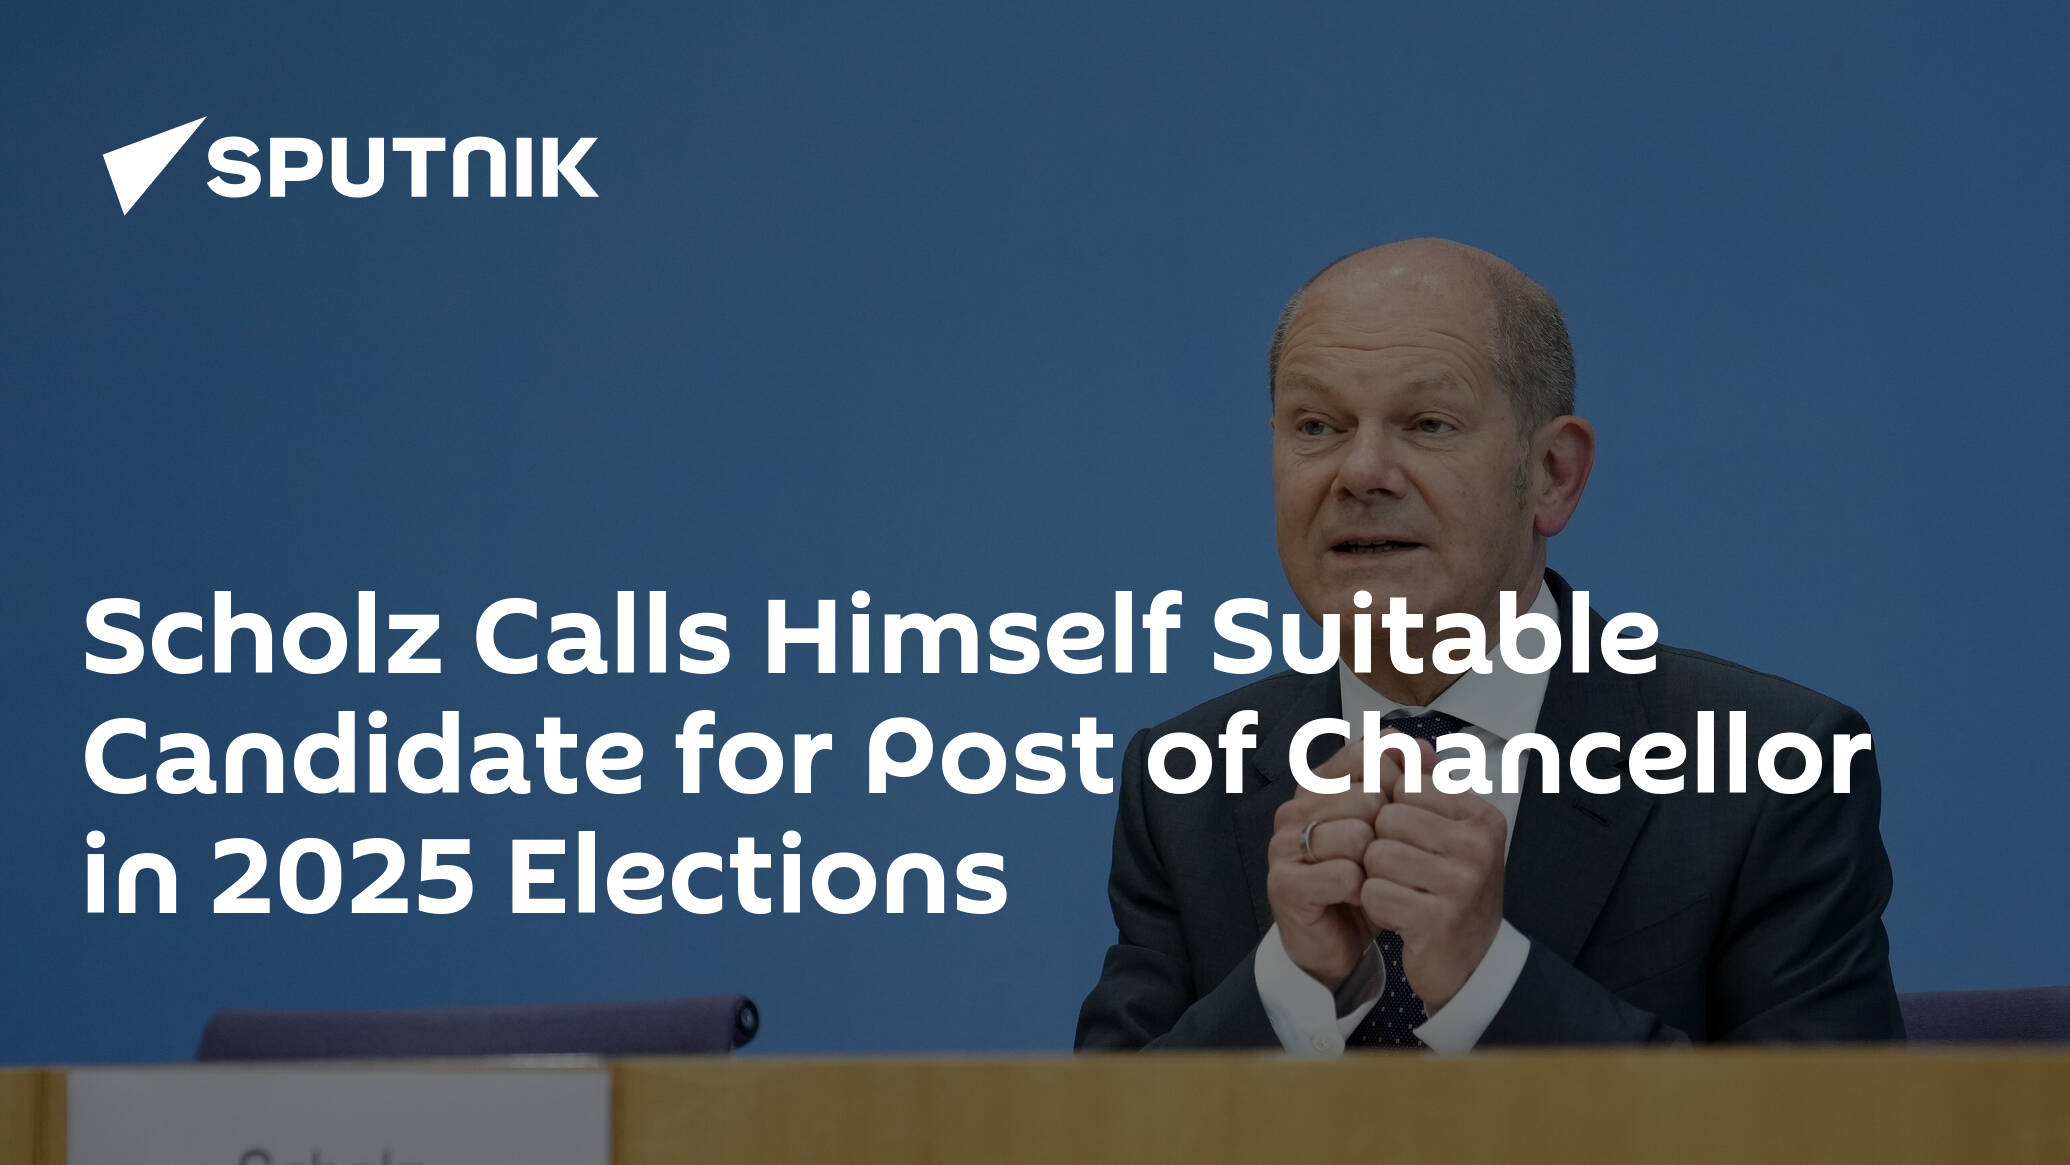 Scholz Calls Himself Suitable Candidate for Post of Chancellor in 2025 Elections